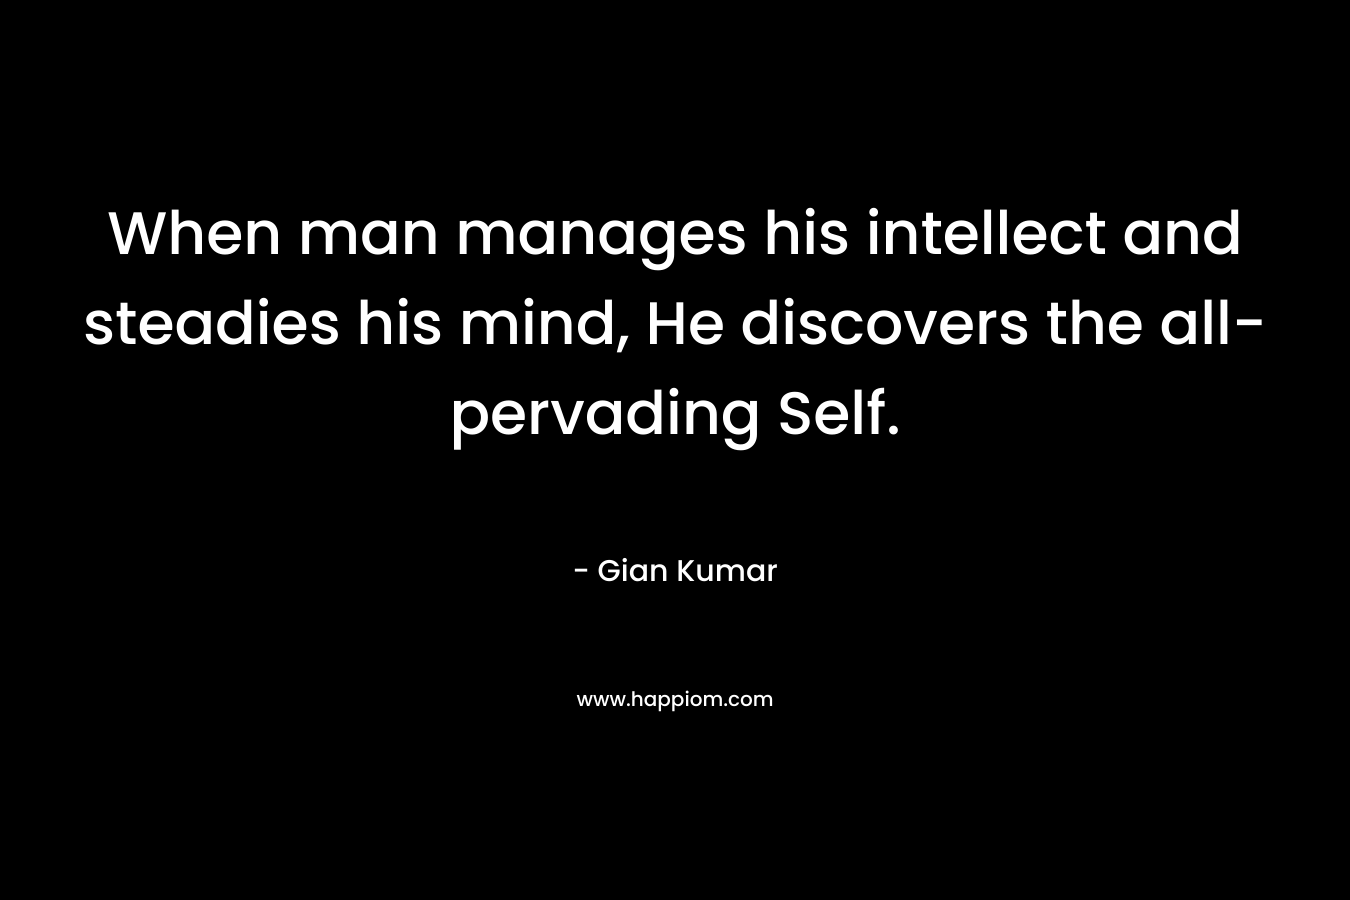 When man manages his intellect and steadies his mind, He discovers the all-pervading Self.